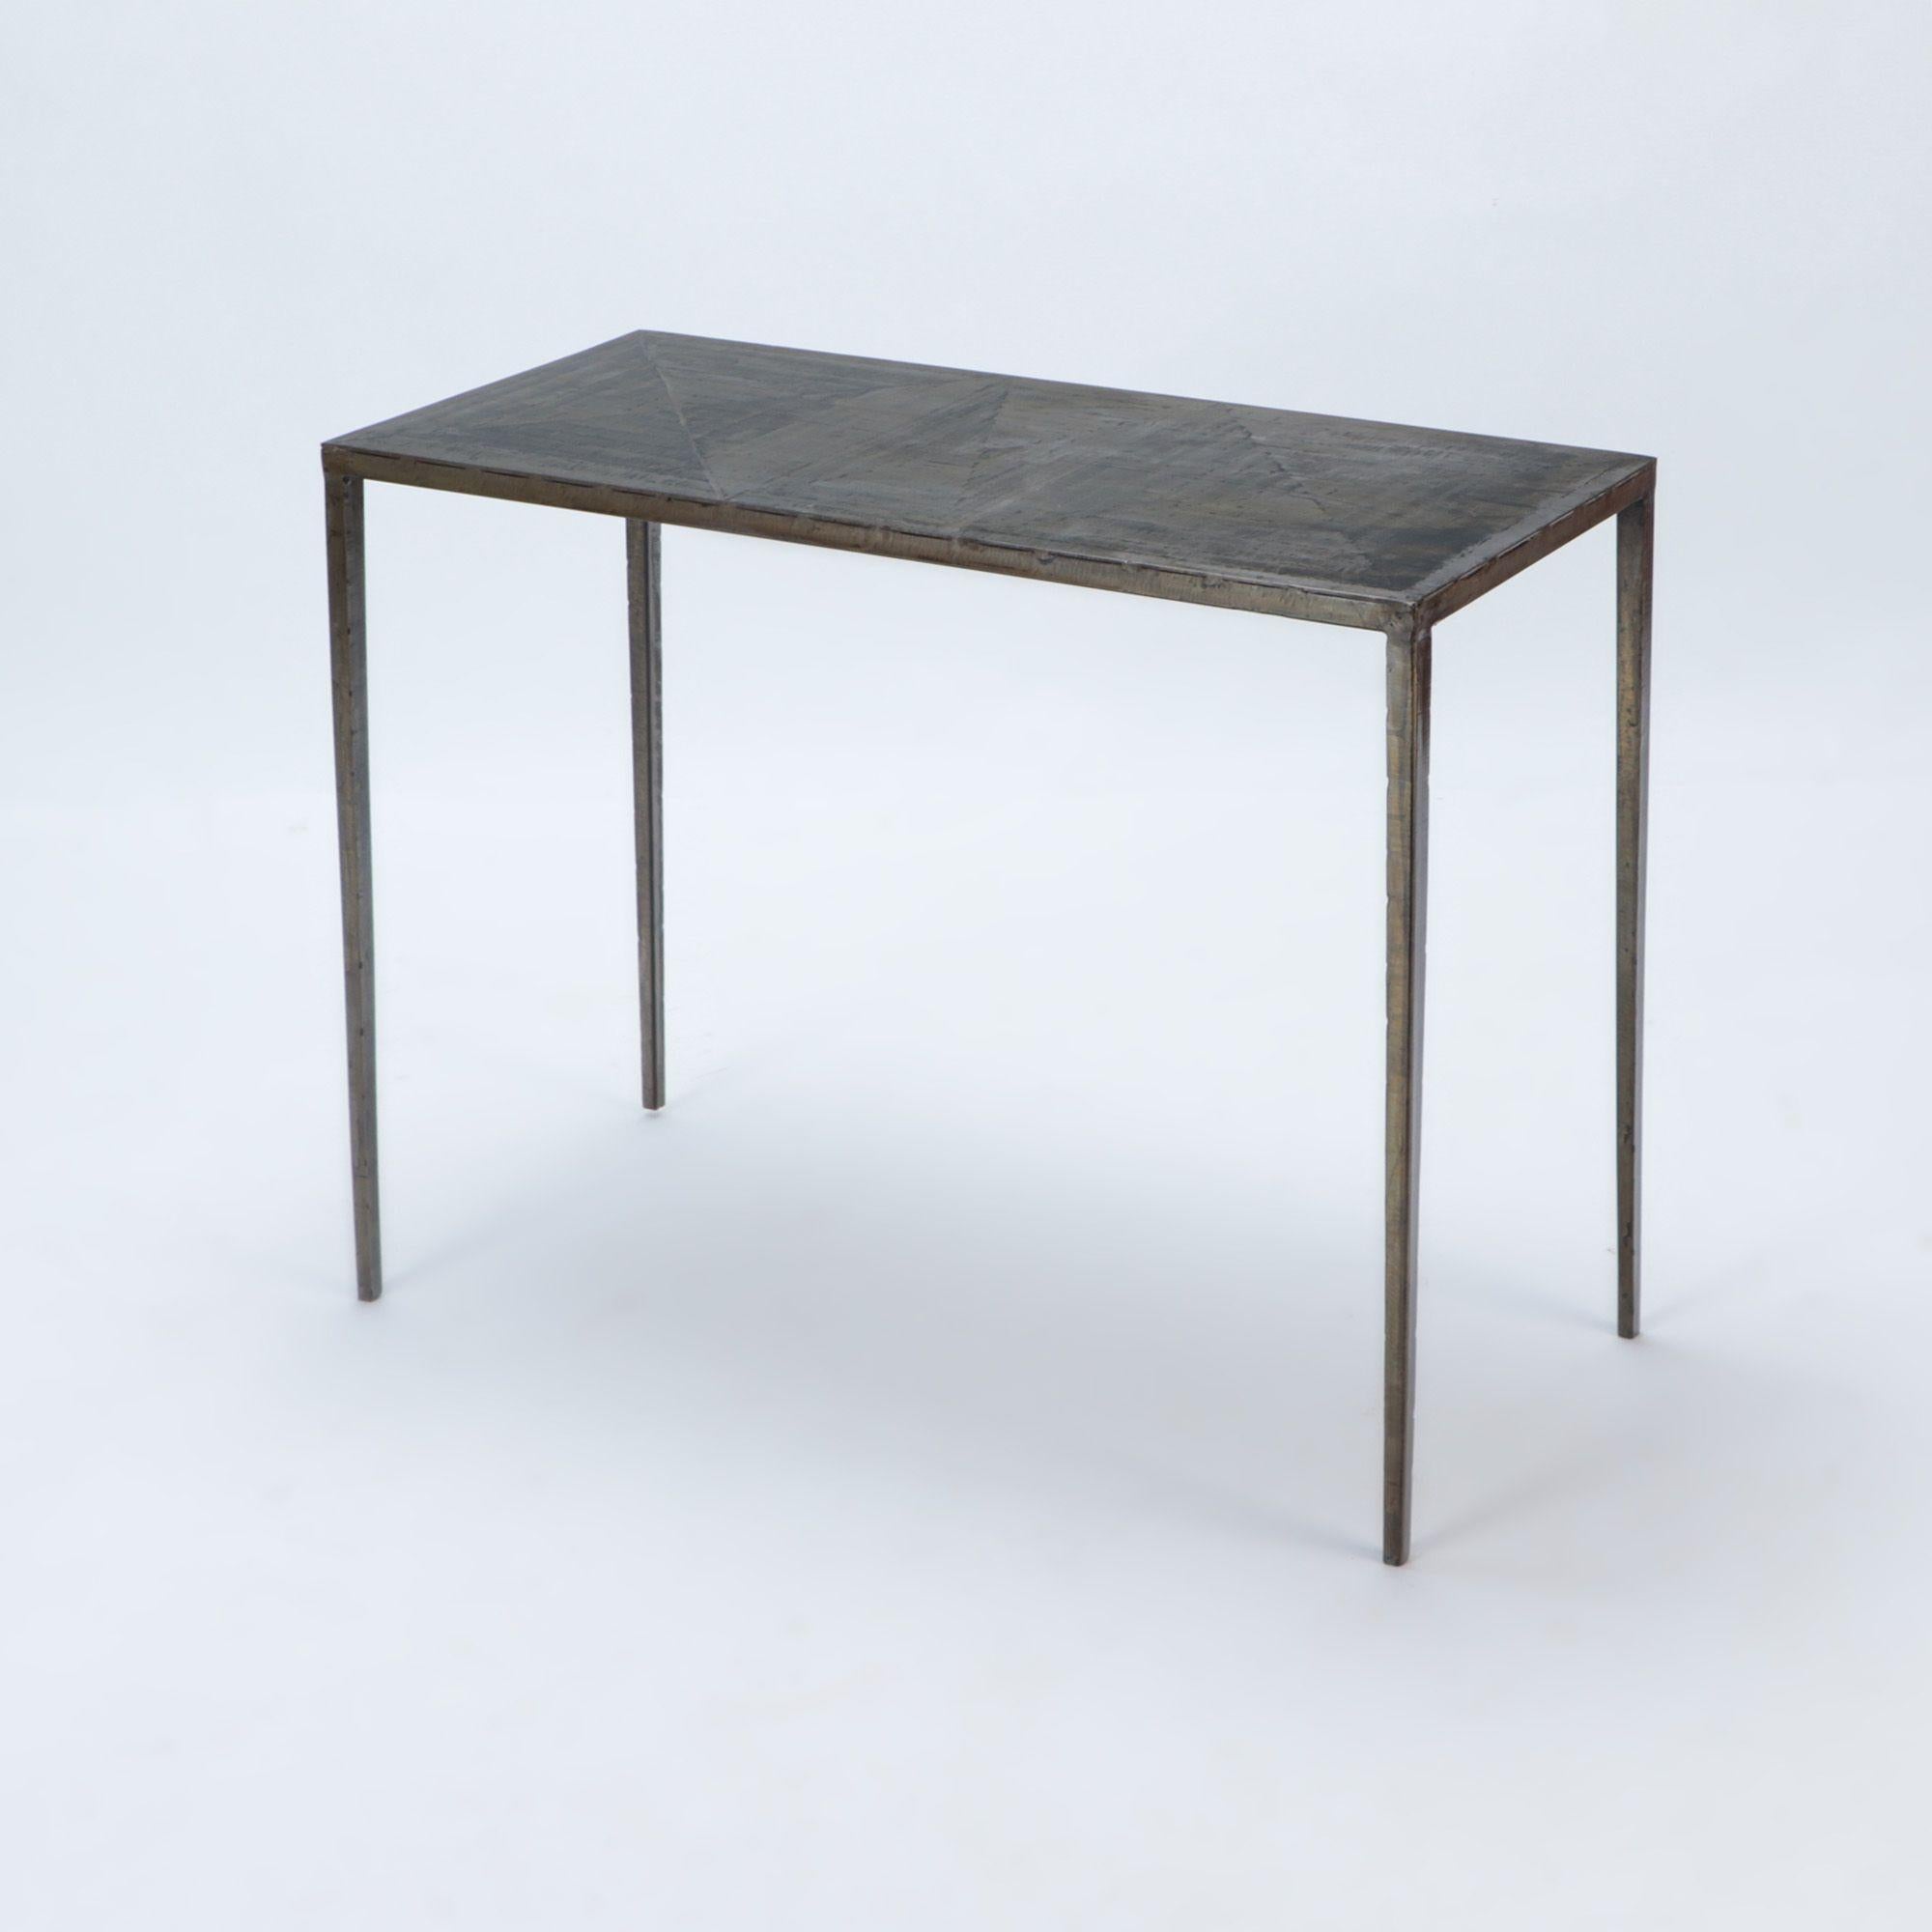 A wrought iron console with bronze wash and slender matte black wrought iron bases. In the manner of Jean-Michel Frank. Contemporary.